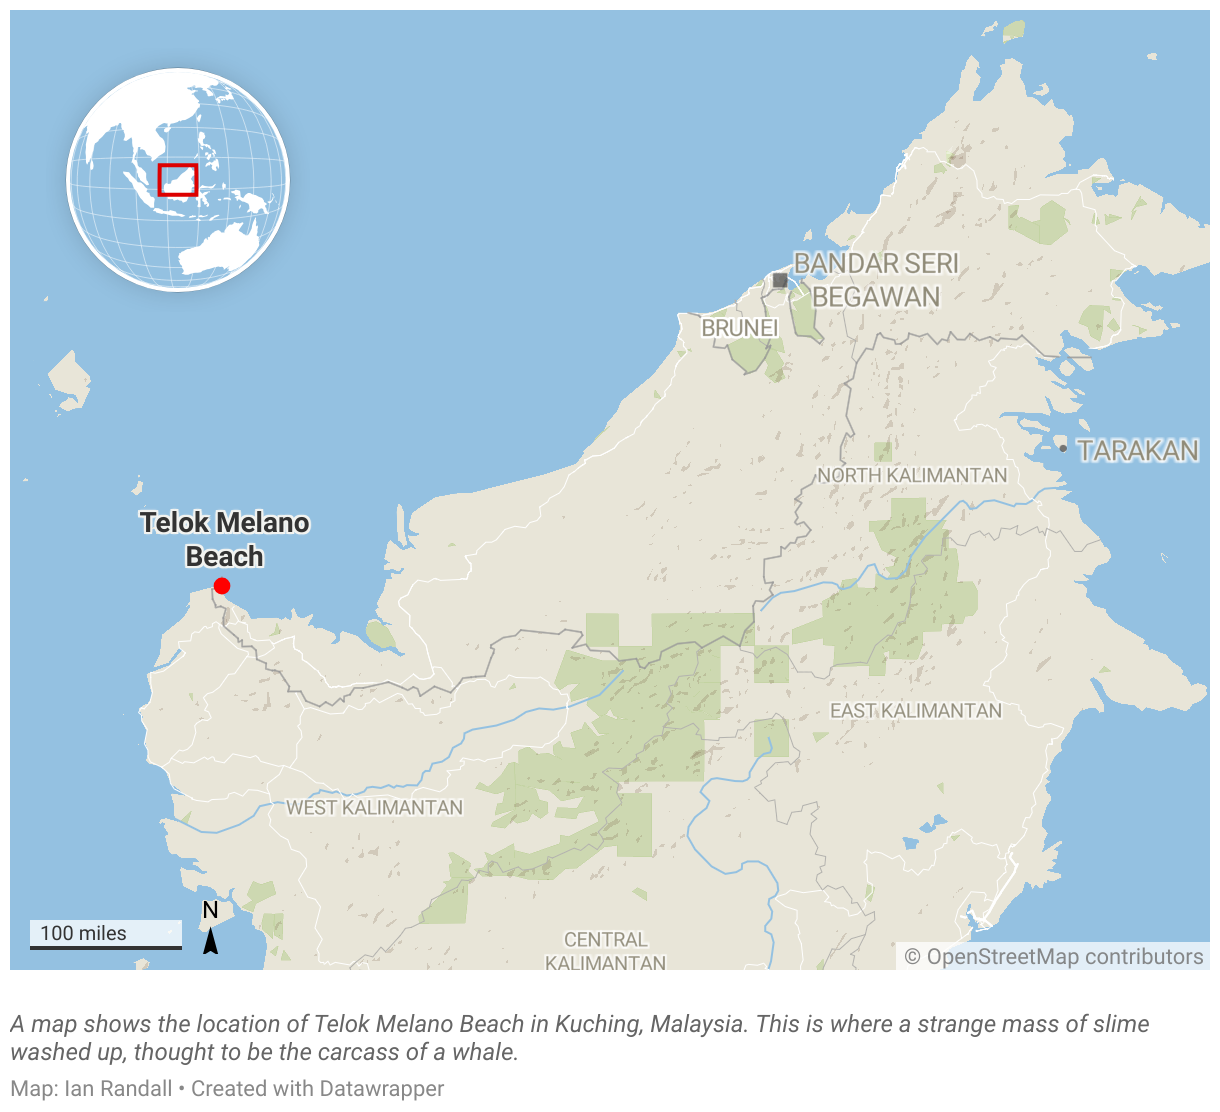 A map shows the location of Teluk Melano Beach in Kuching, Malaysia.